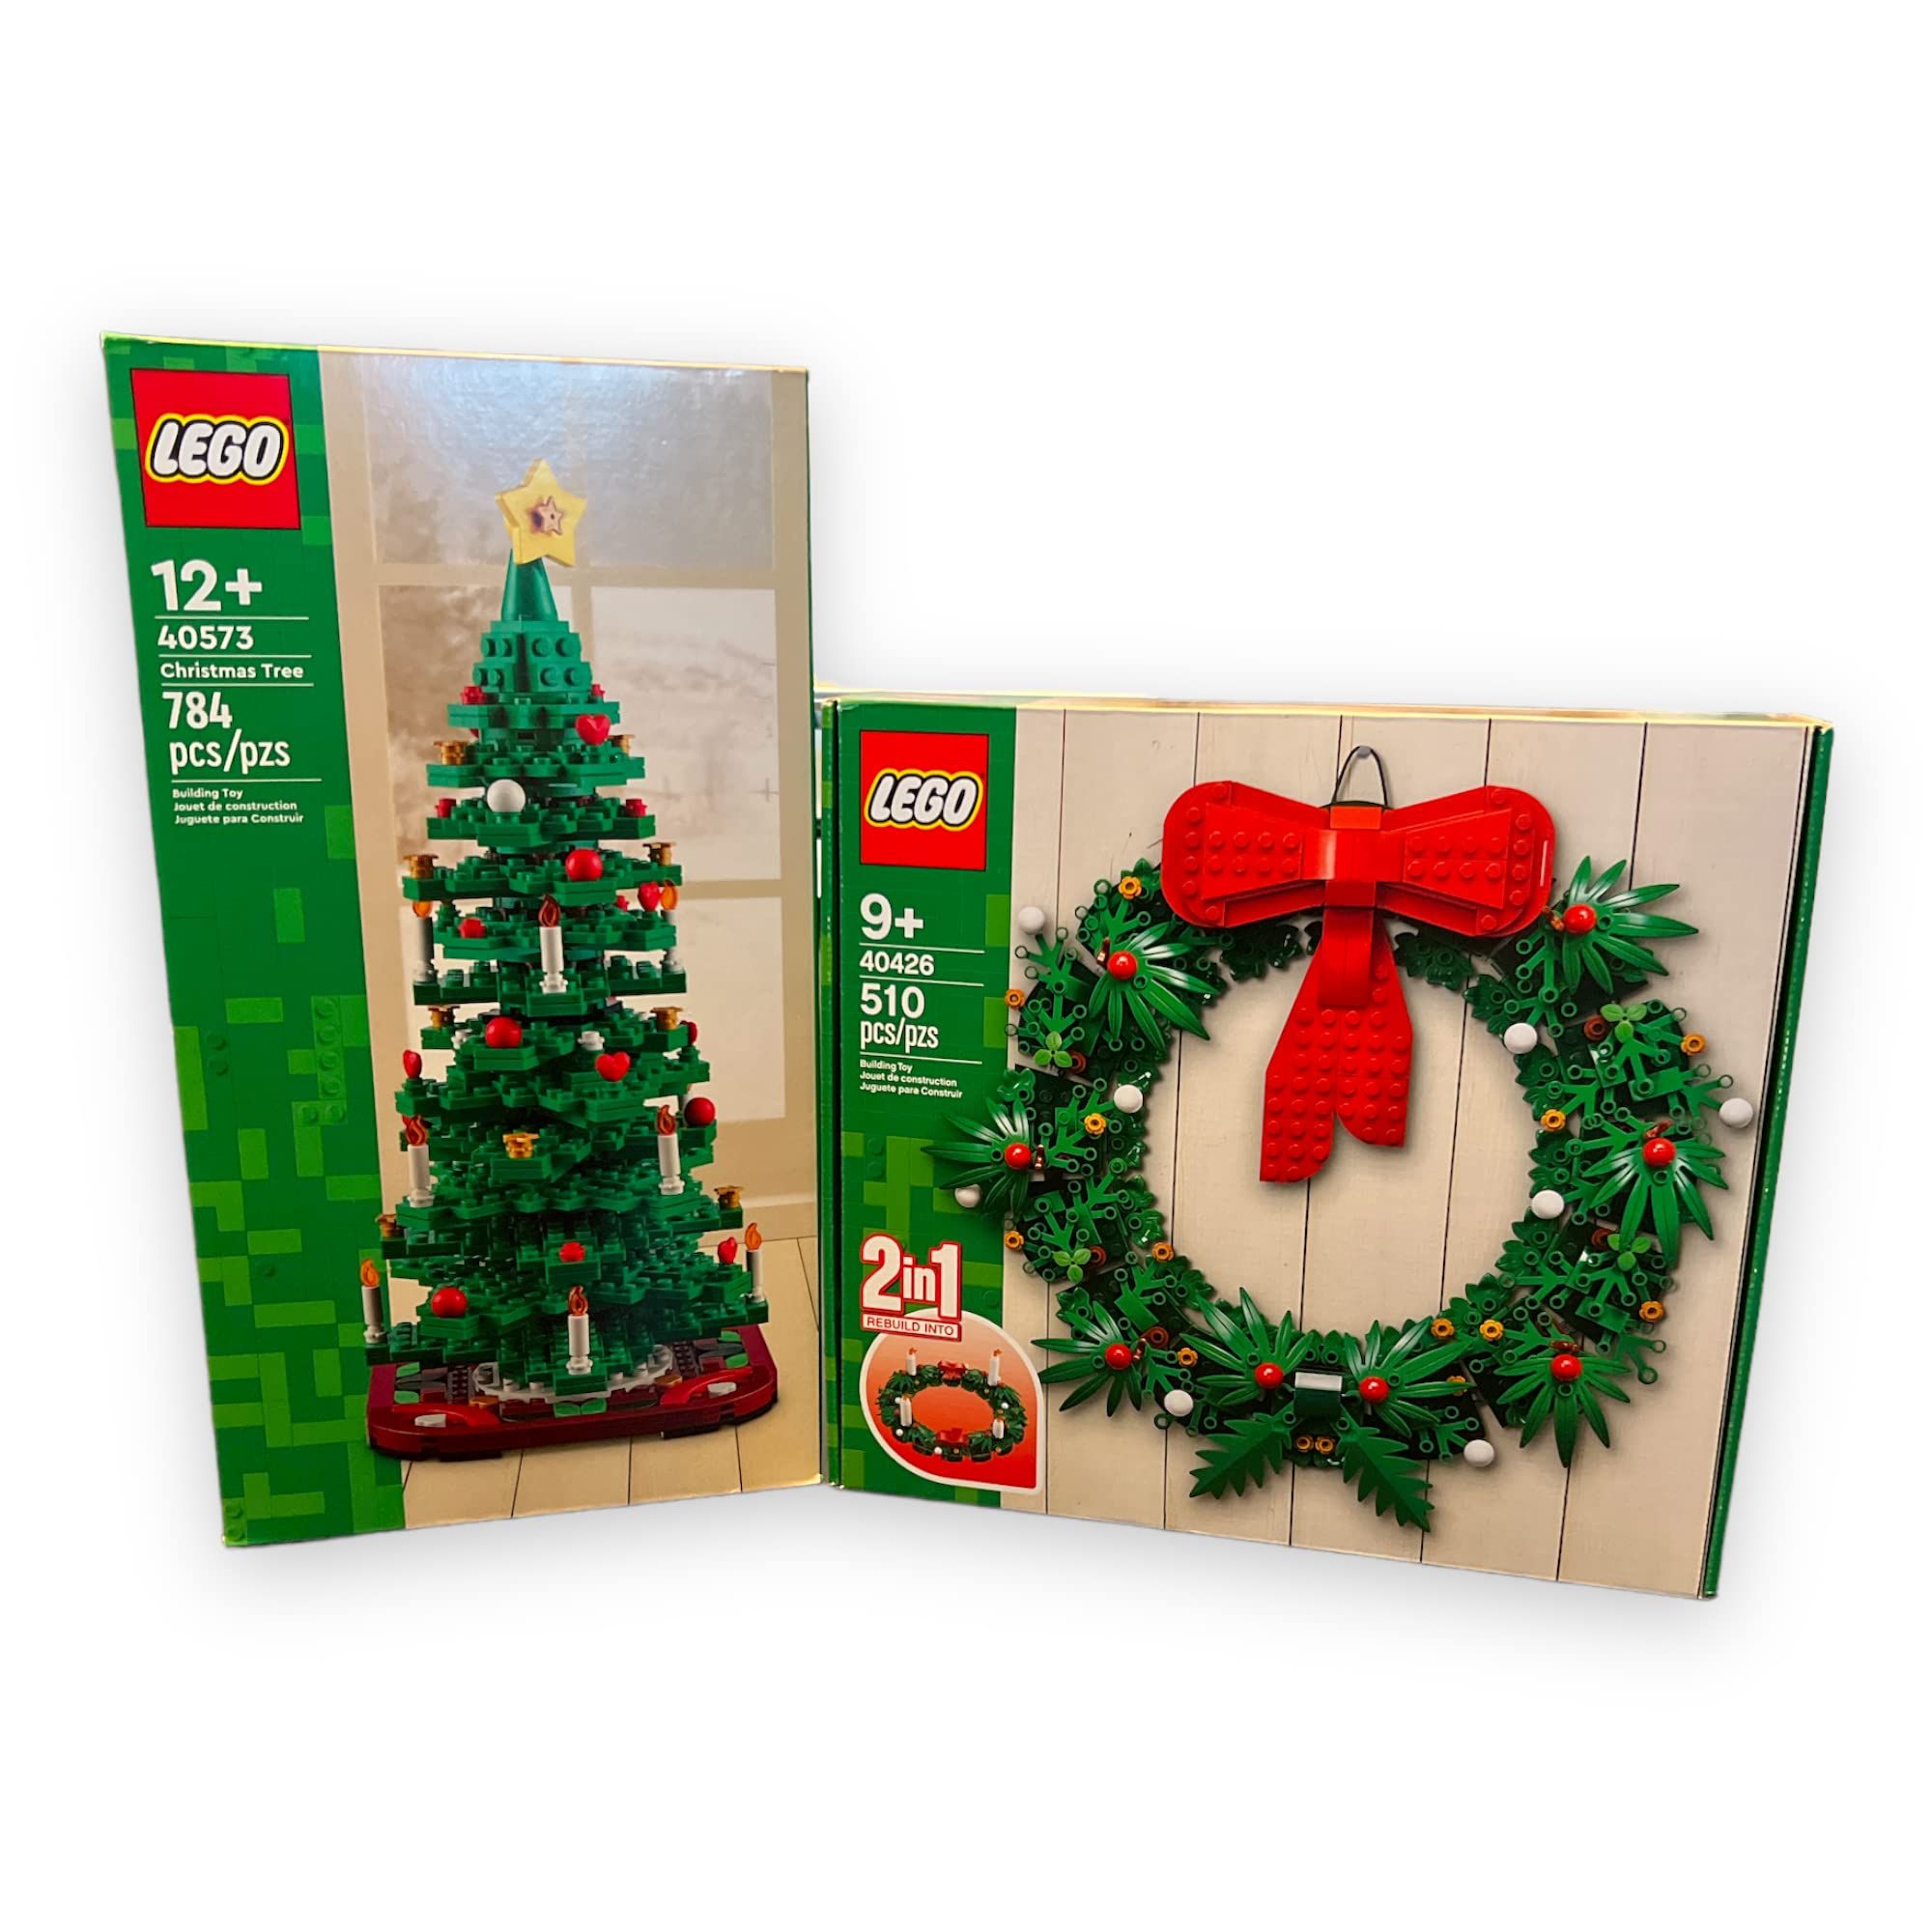 Gingerbread House Christmas Ornament With Instructions Build Your Own With  LEGO® Bricks - Etsy